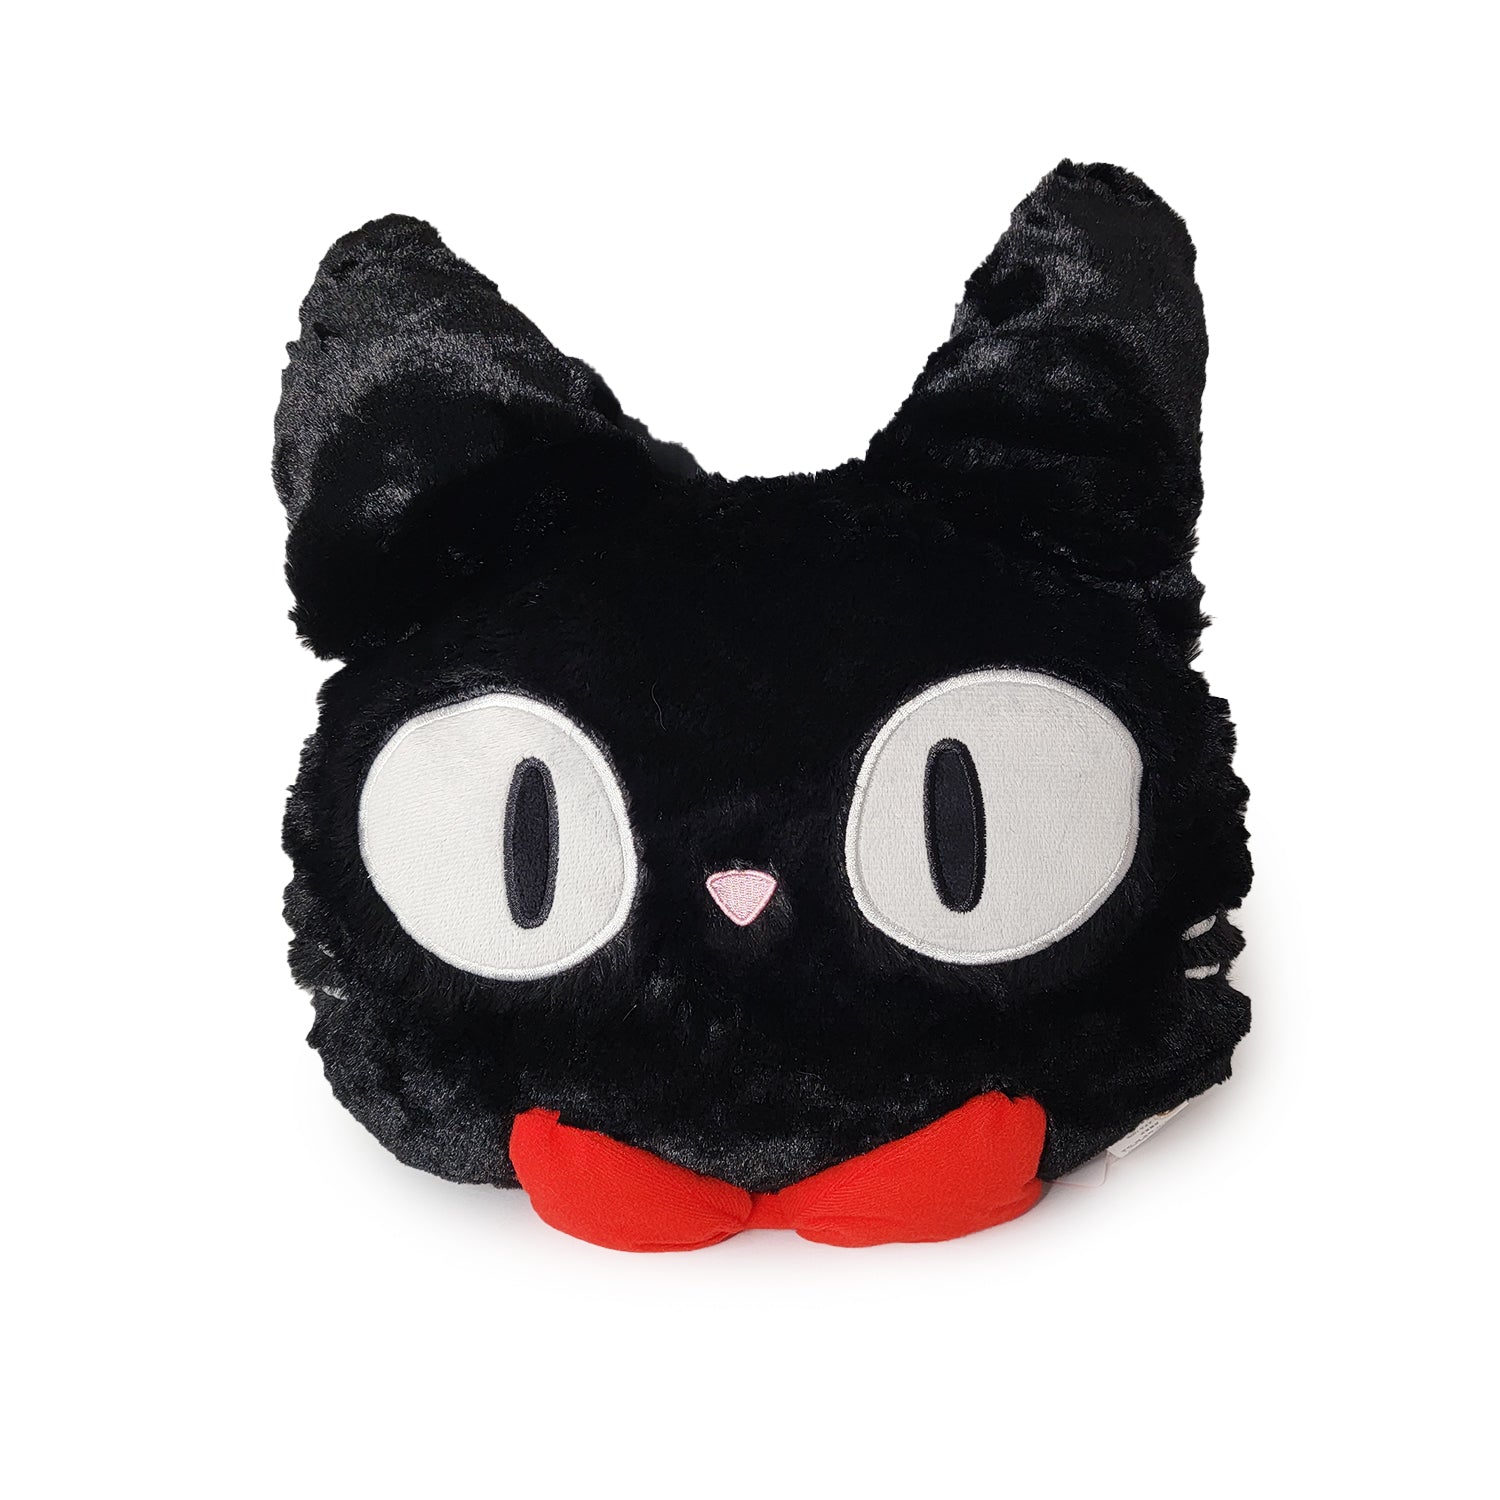 Kiki's Delivery Service - Jiji Die Cut Pillow Cushion image count 0